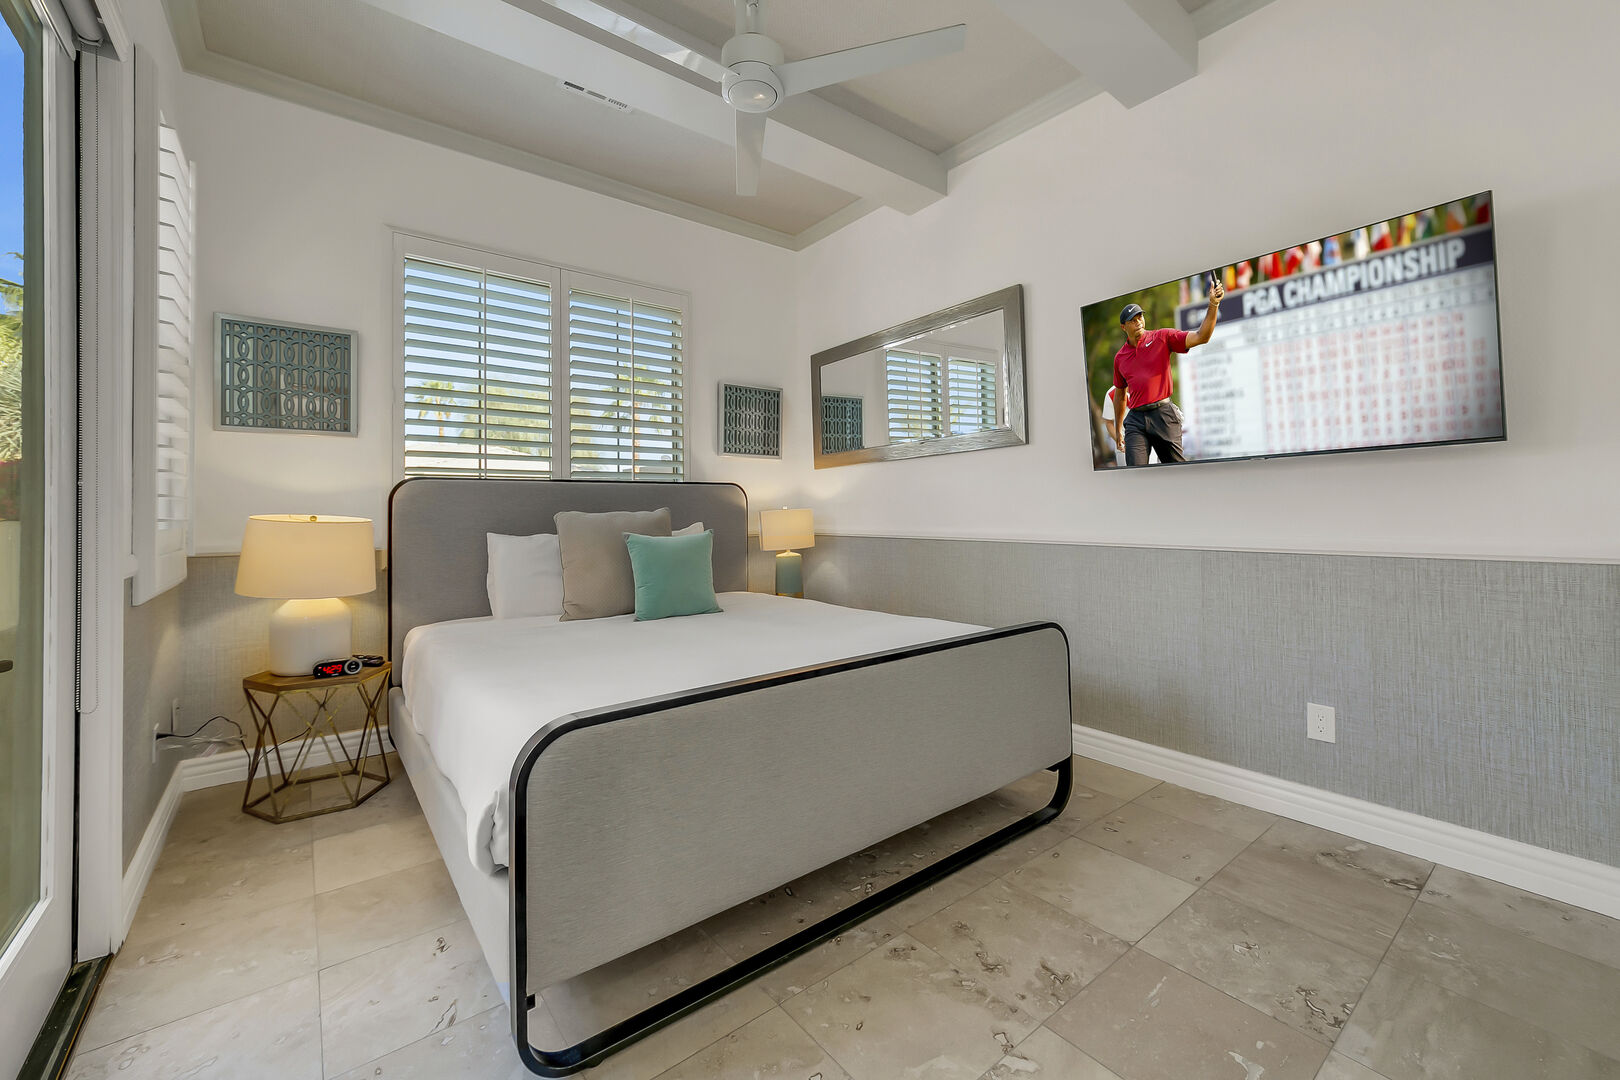 Casita Suite 3 features a King-sized Bed.